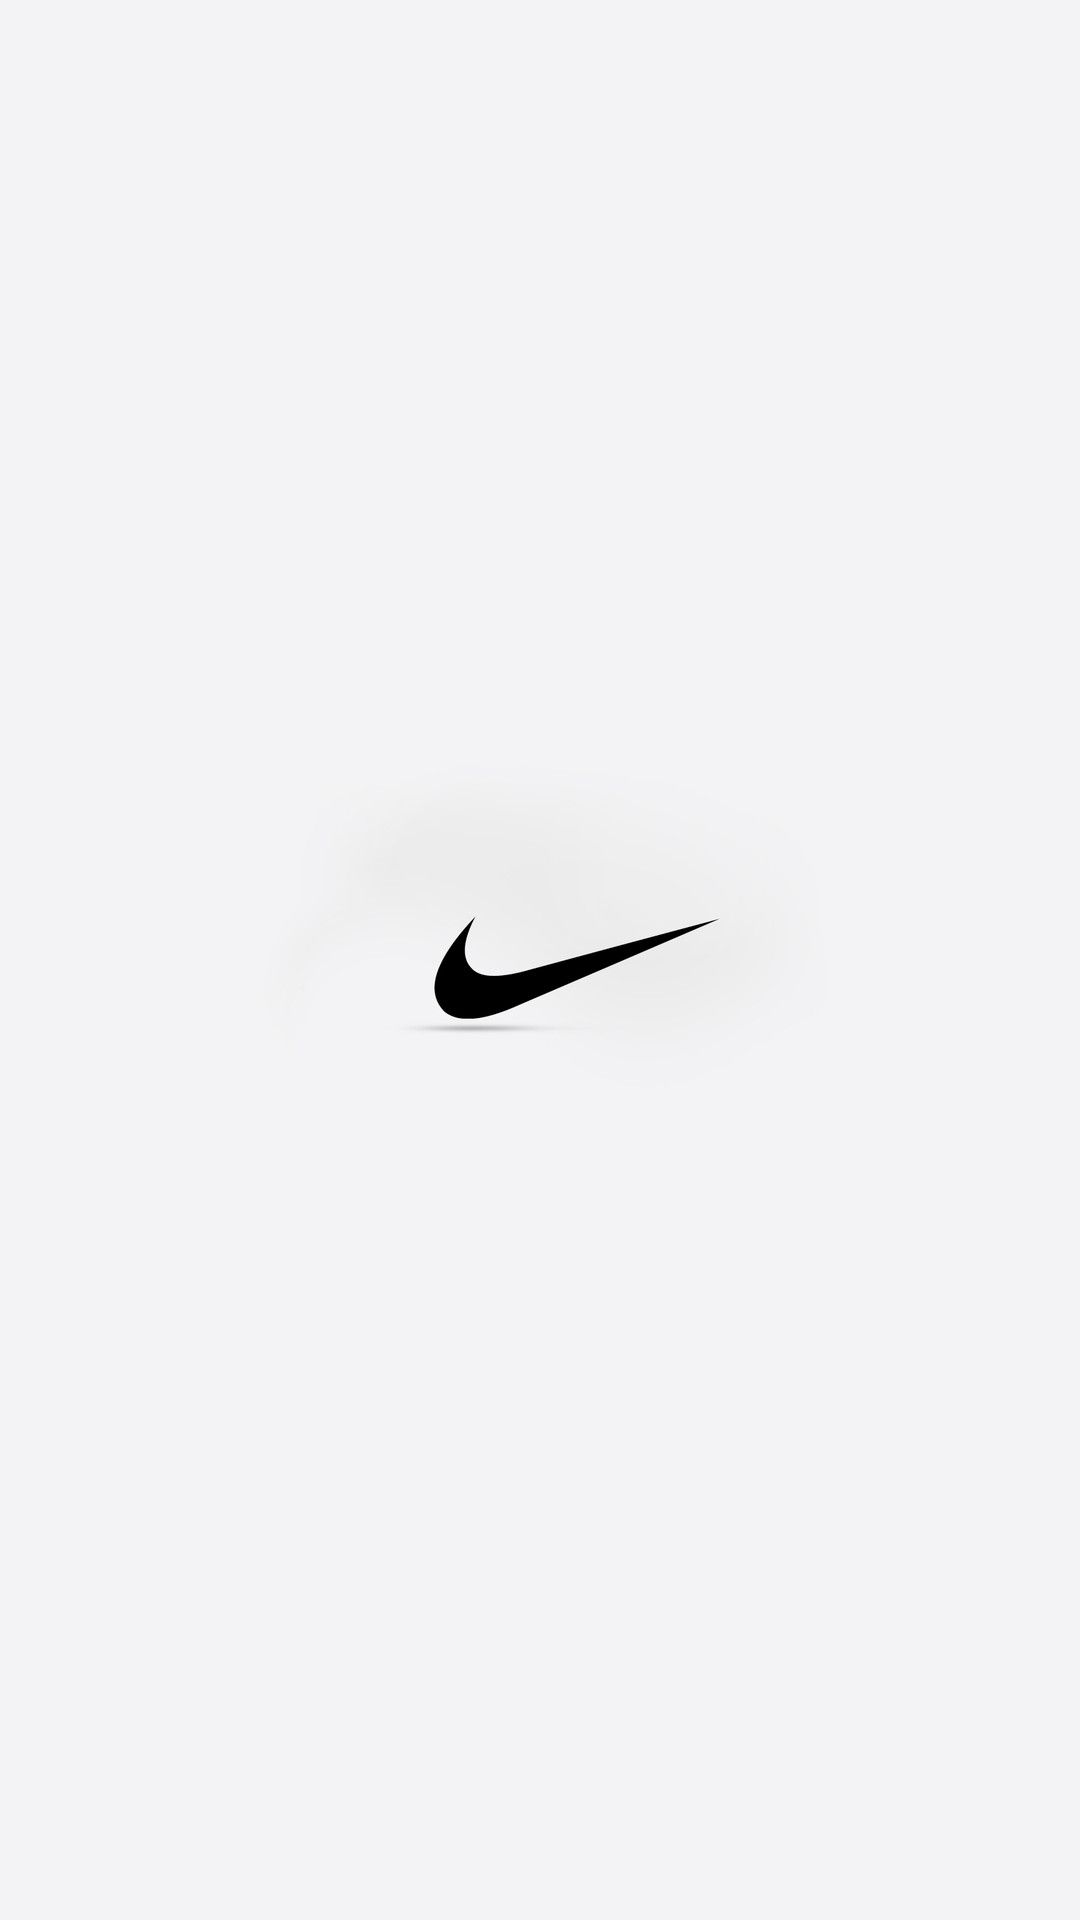 Nike Pictures Wallpapers